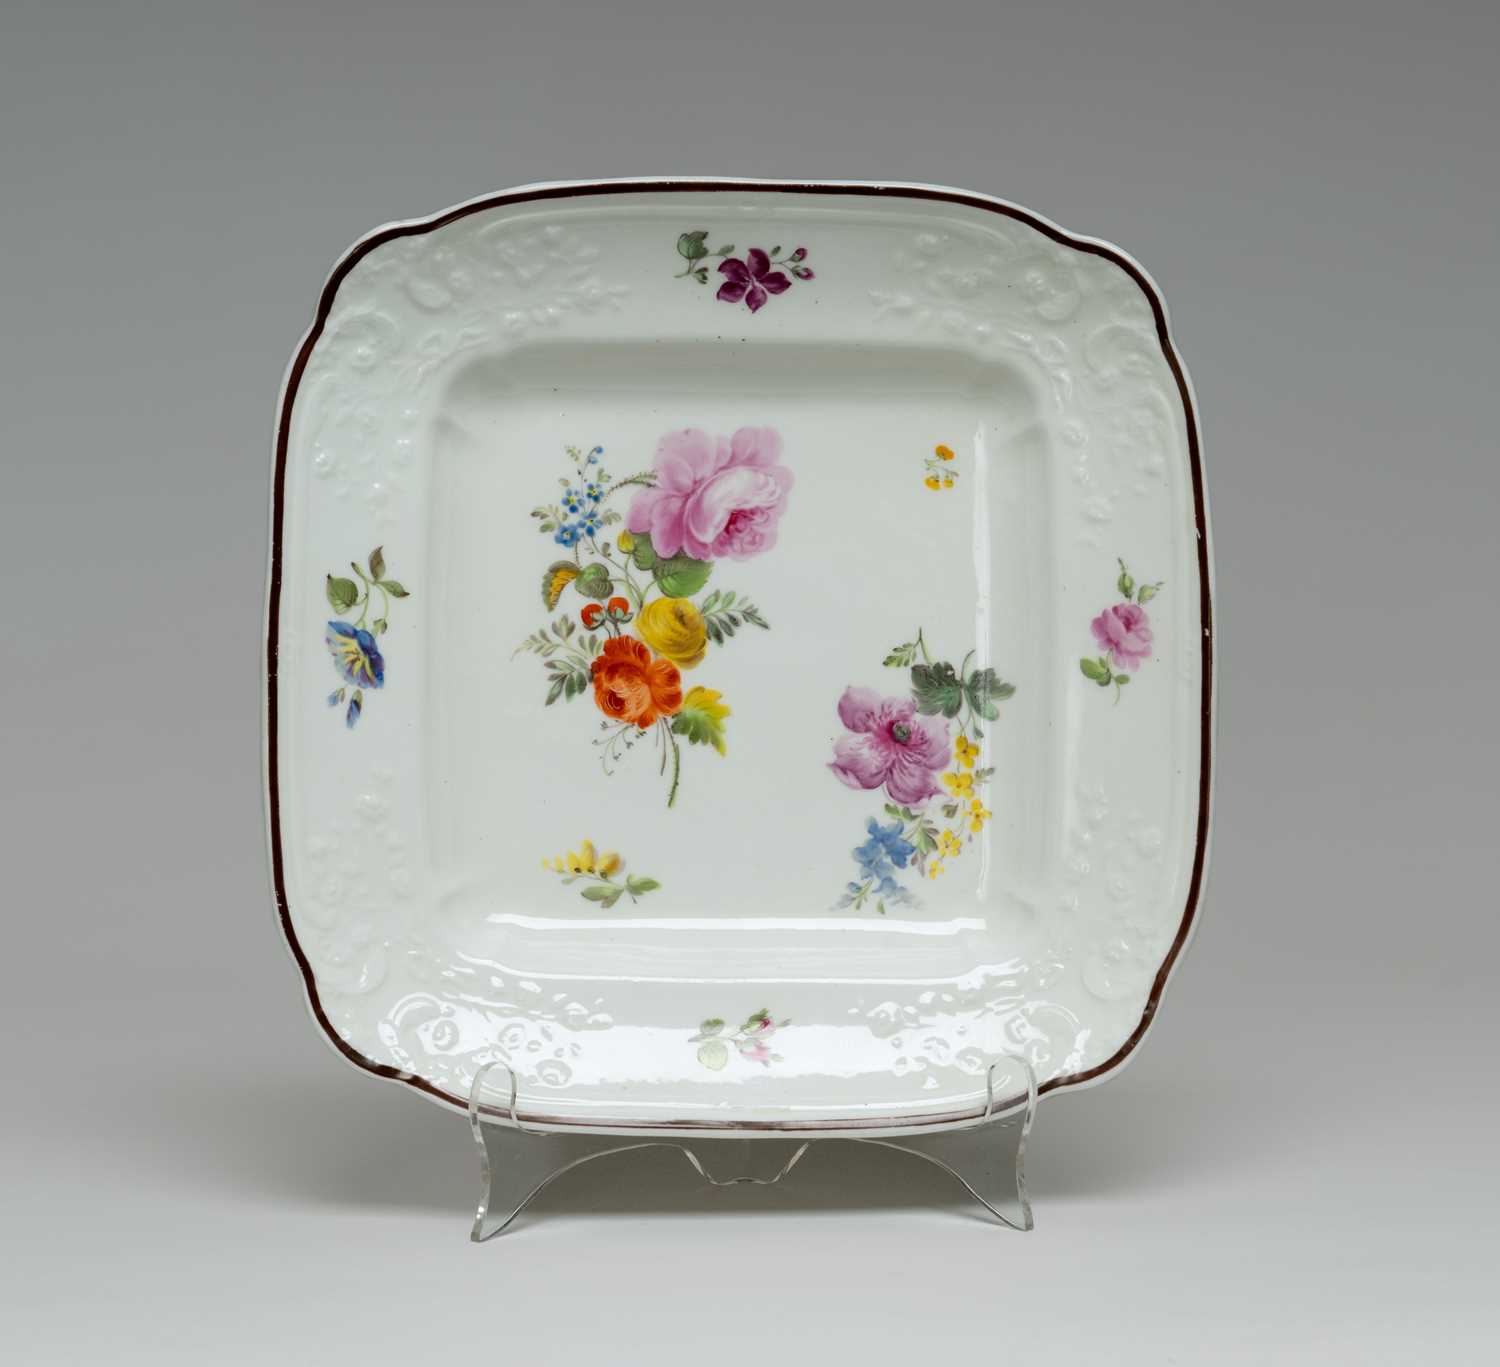 NANTGARW PORCELAIN SQUARE DESSERT DISH circa 1817-1820, moulded c-scroll borders, painted by